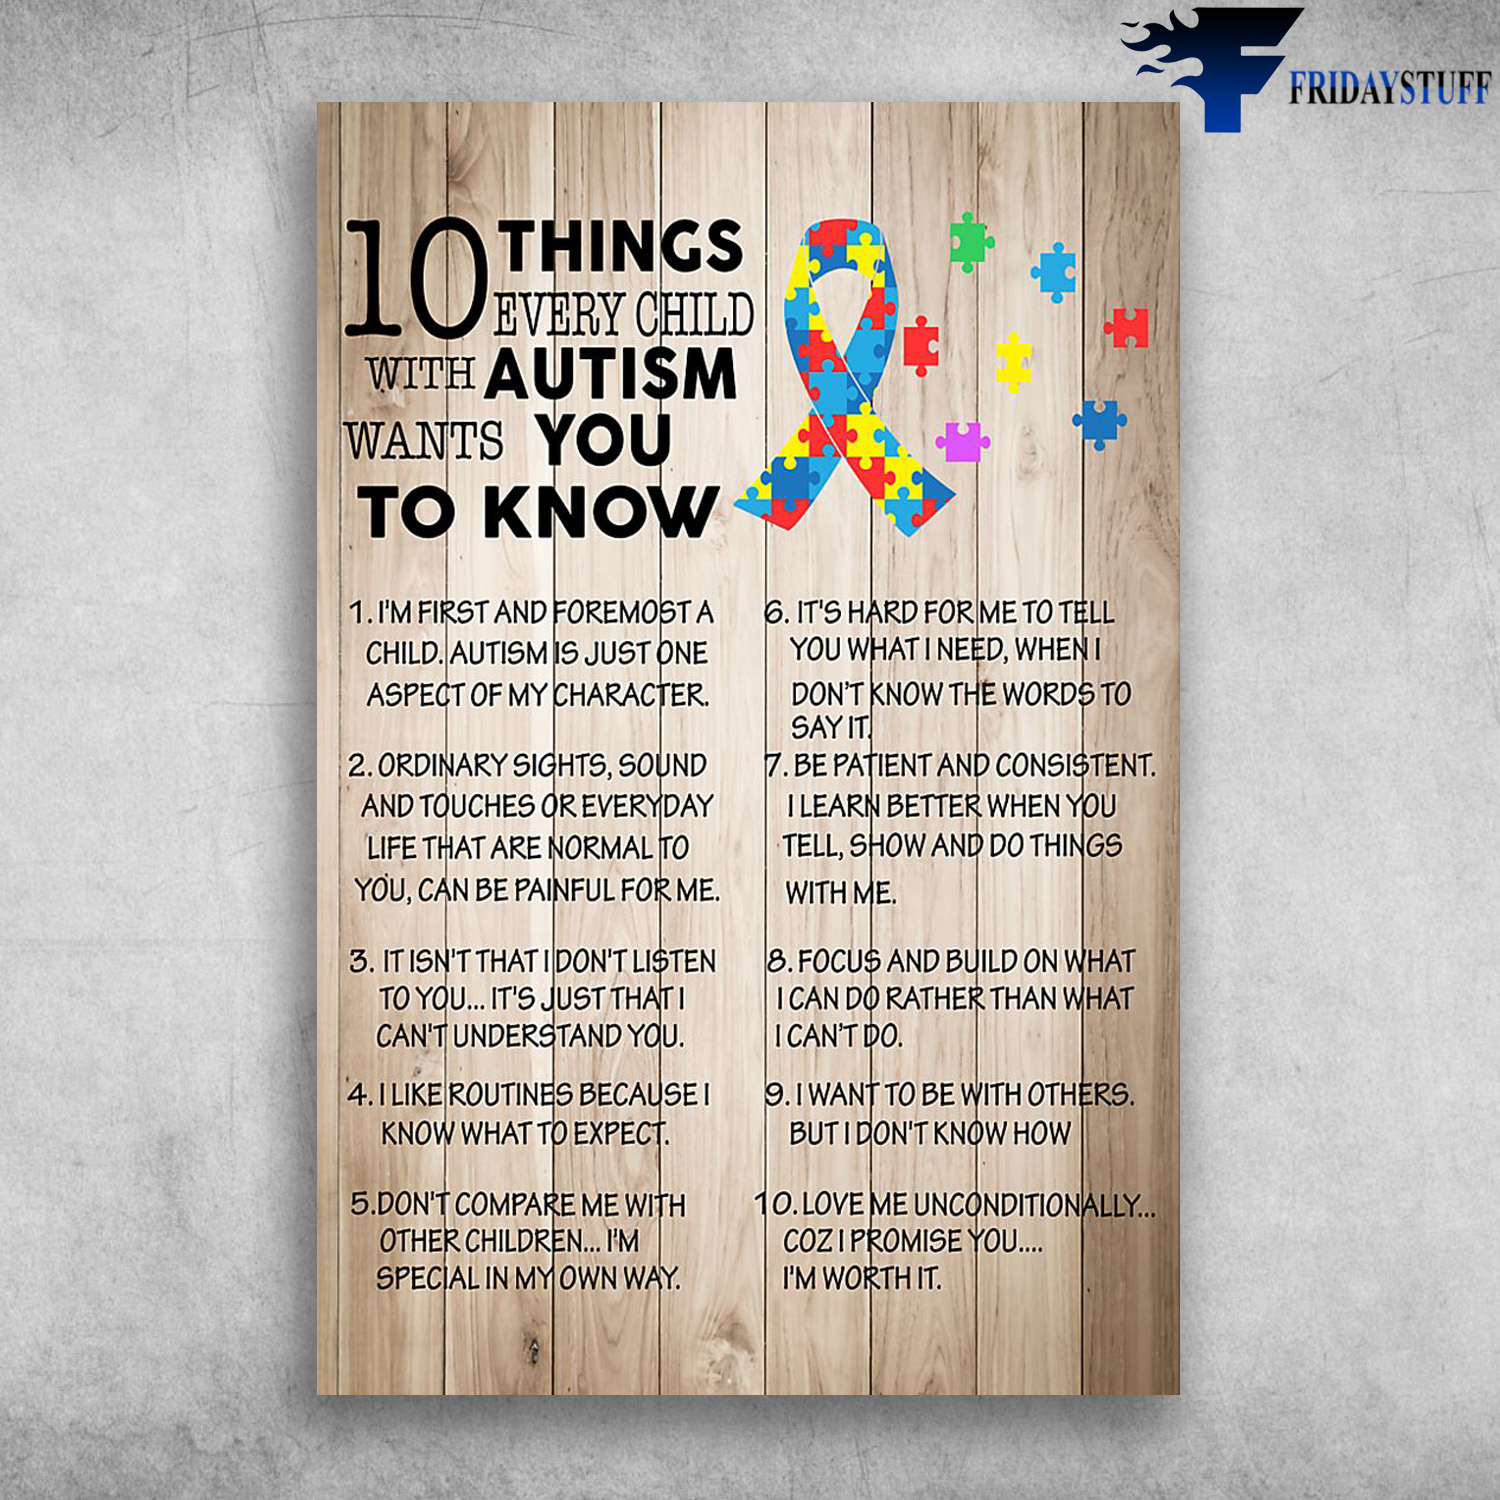 Ten Things Every Child With Autism Wants You To Know